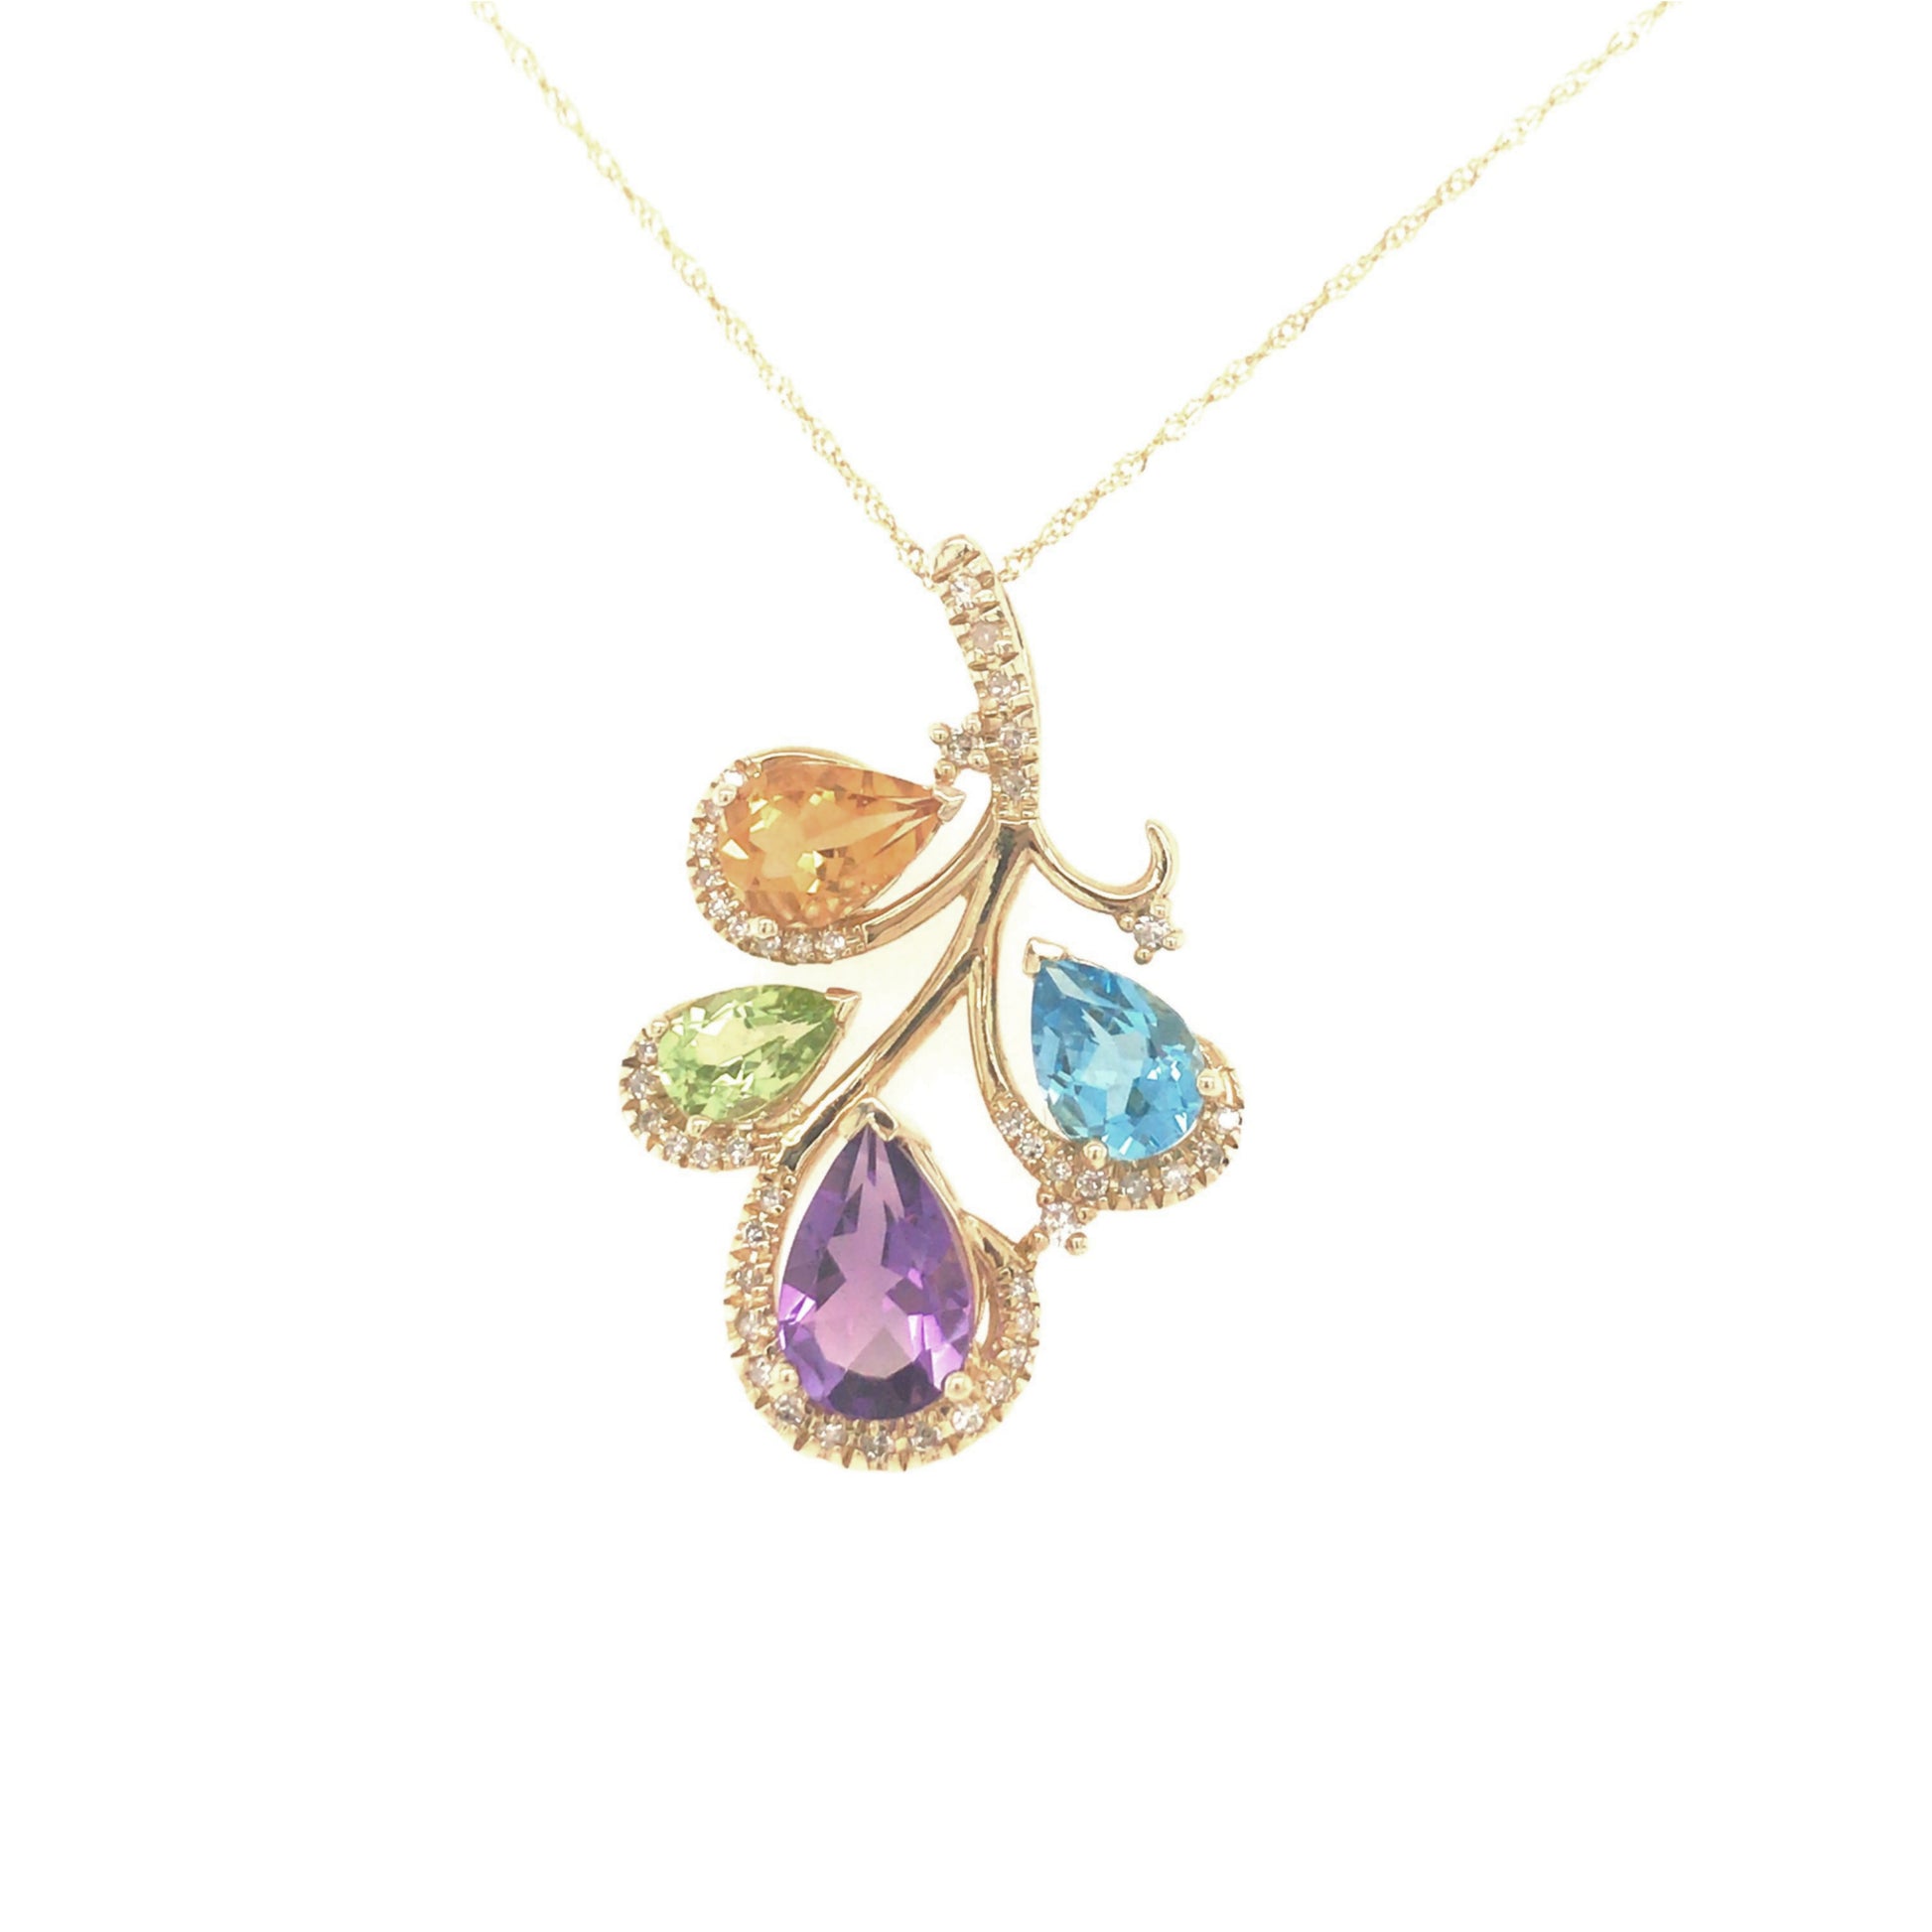 14K Gold Branch With Colorful Stone Buds and Diamonds Pendant Necklace - HK Jewels